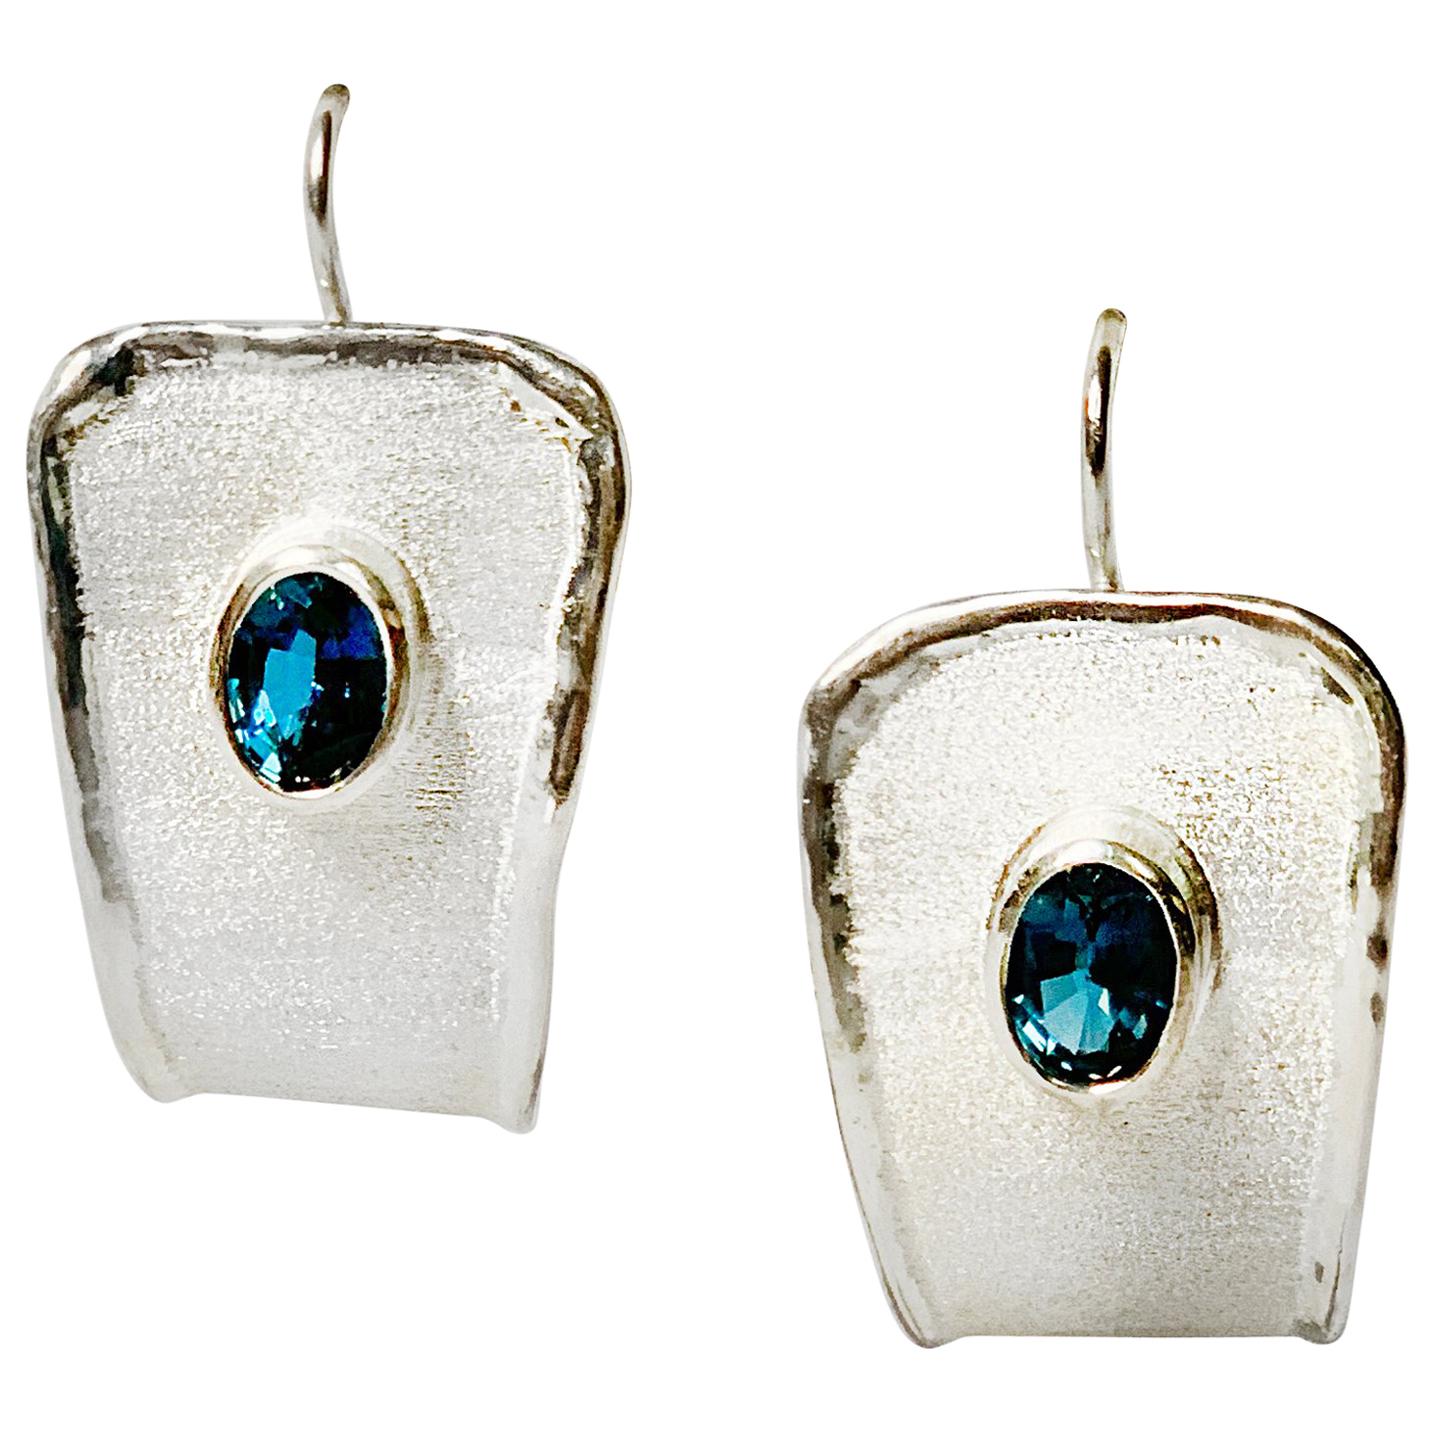 Yianni Creations Ammos Collection 100% Handmade Artisan Dangle Earrings from Fine Silver. Each earring features 1.20 Carat Oval Cut London Blue Topaz complemented by unique techniques of craftsmanship - brushed texture and nature-inspired liquid